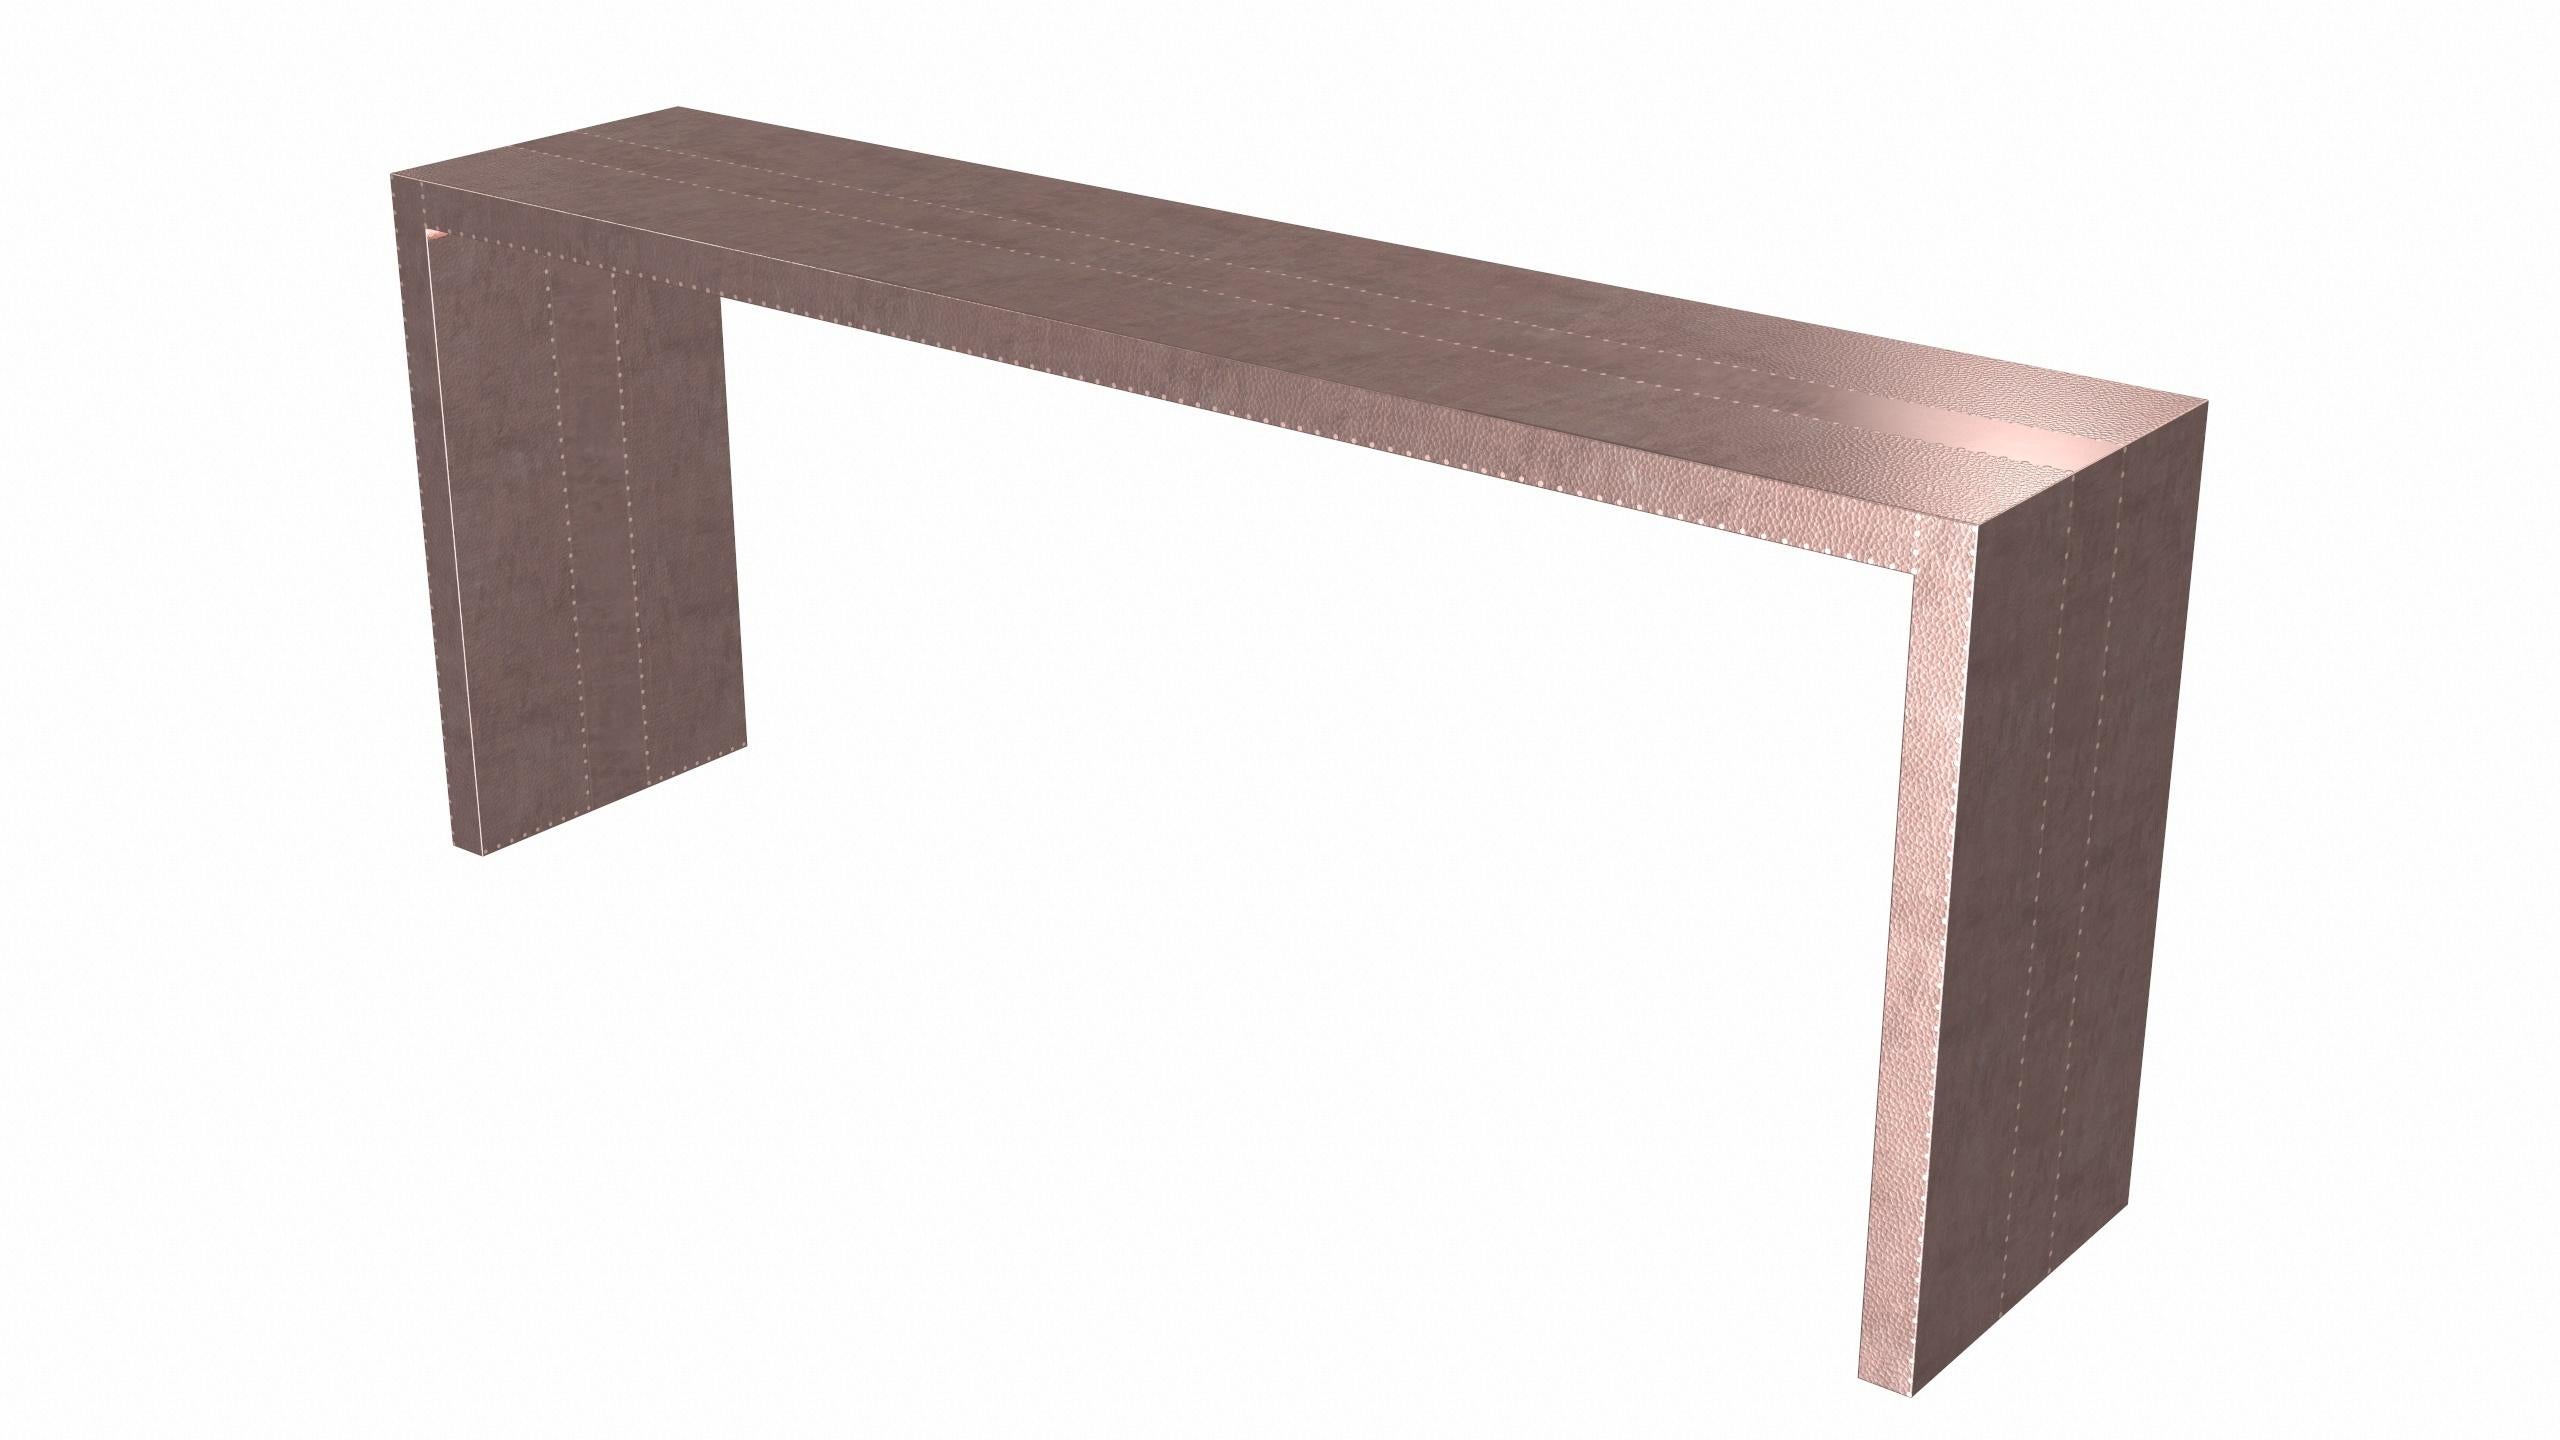 Contemporary Art Deco Rectangular Console Tables Mid. Hammered Copper by Alison Spear For Sale